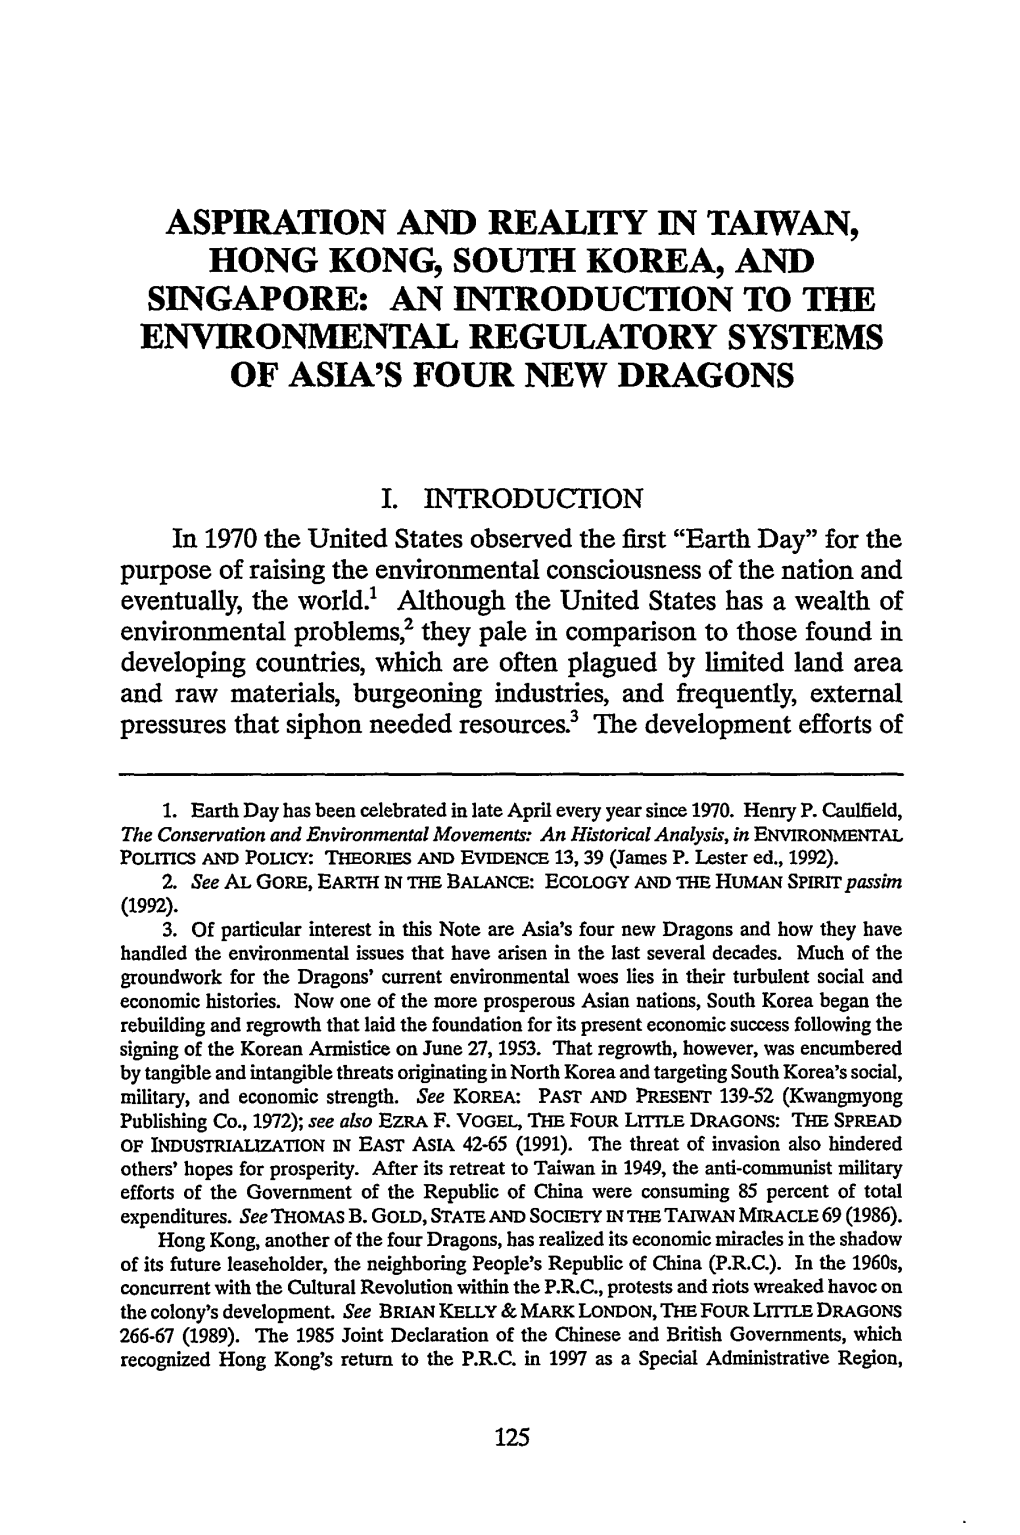 Aspiration and Reality in Taiwan, Hong Kong, South Korea, and Singapore: an Introduction to the Environmental Regulatory Systems of Asia's Four New Dragons